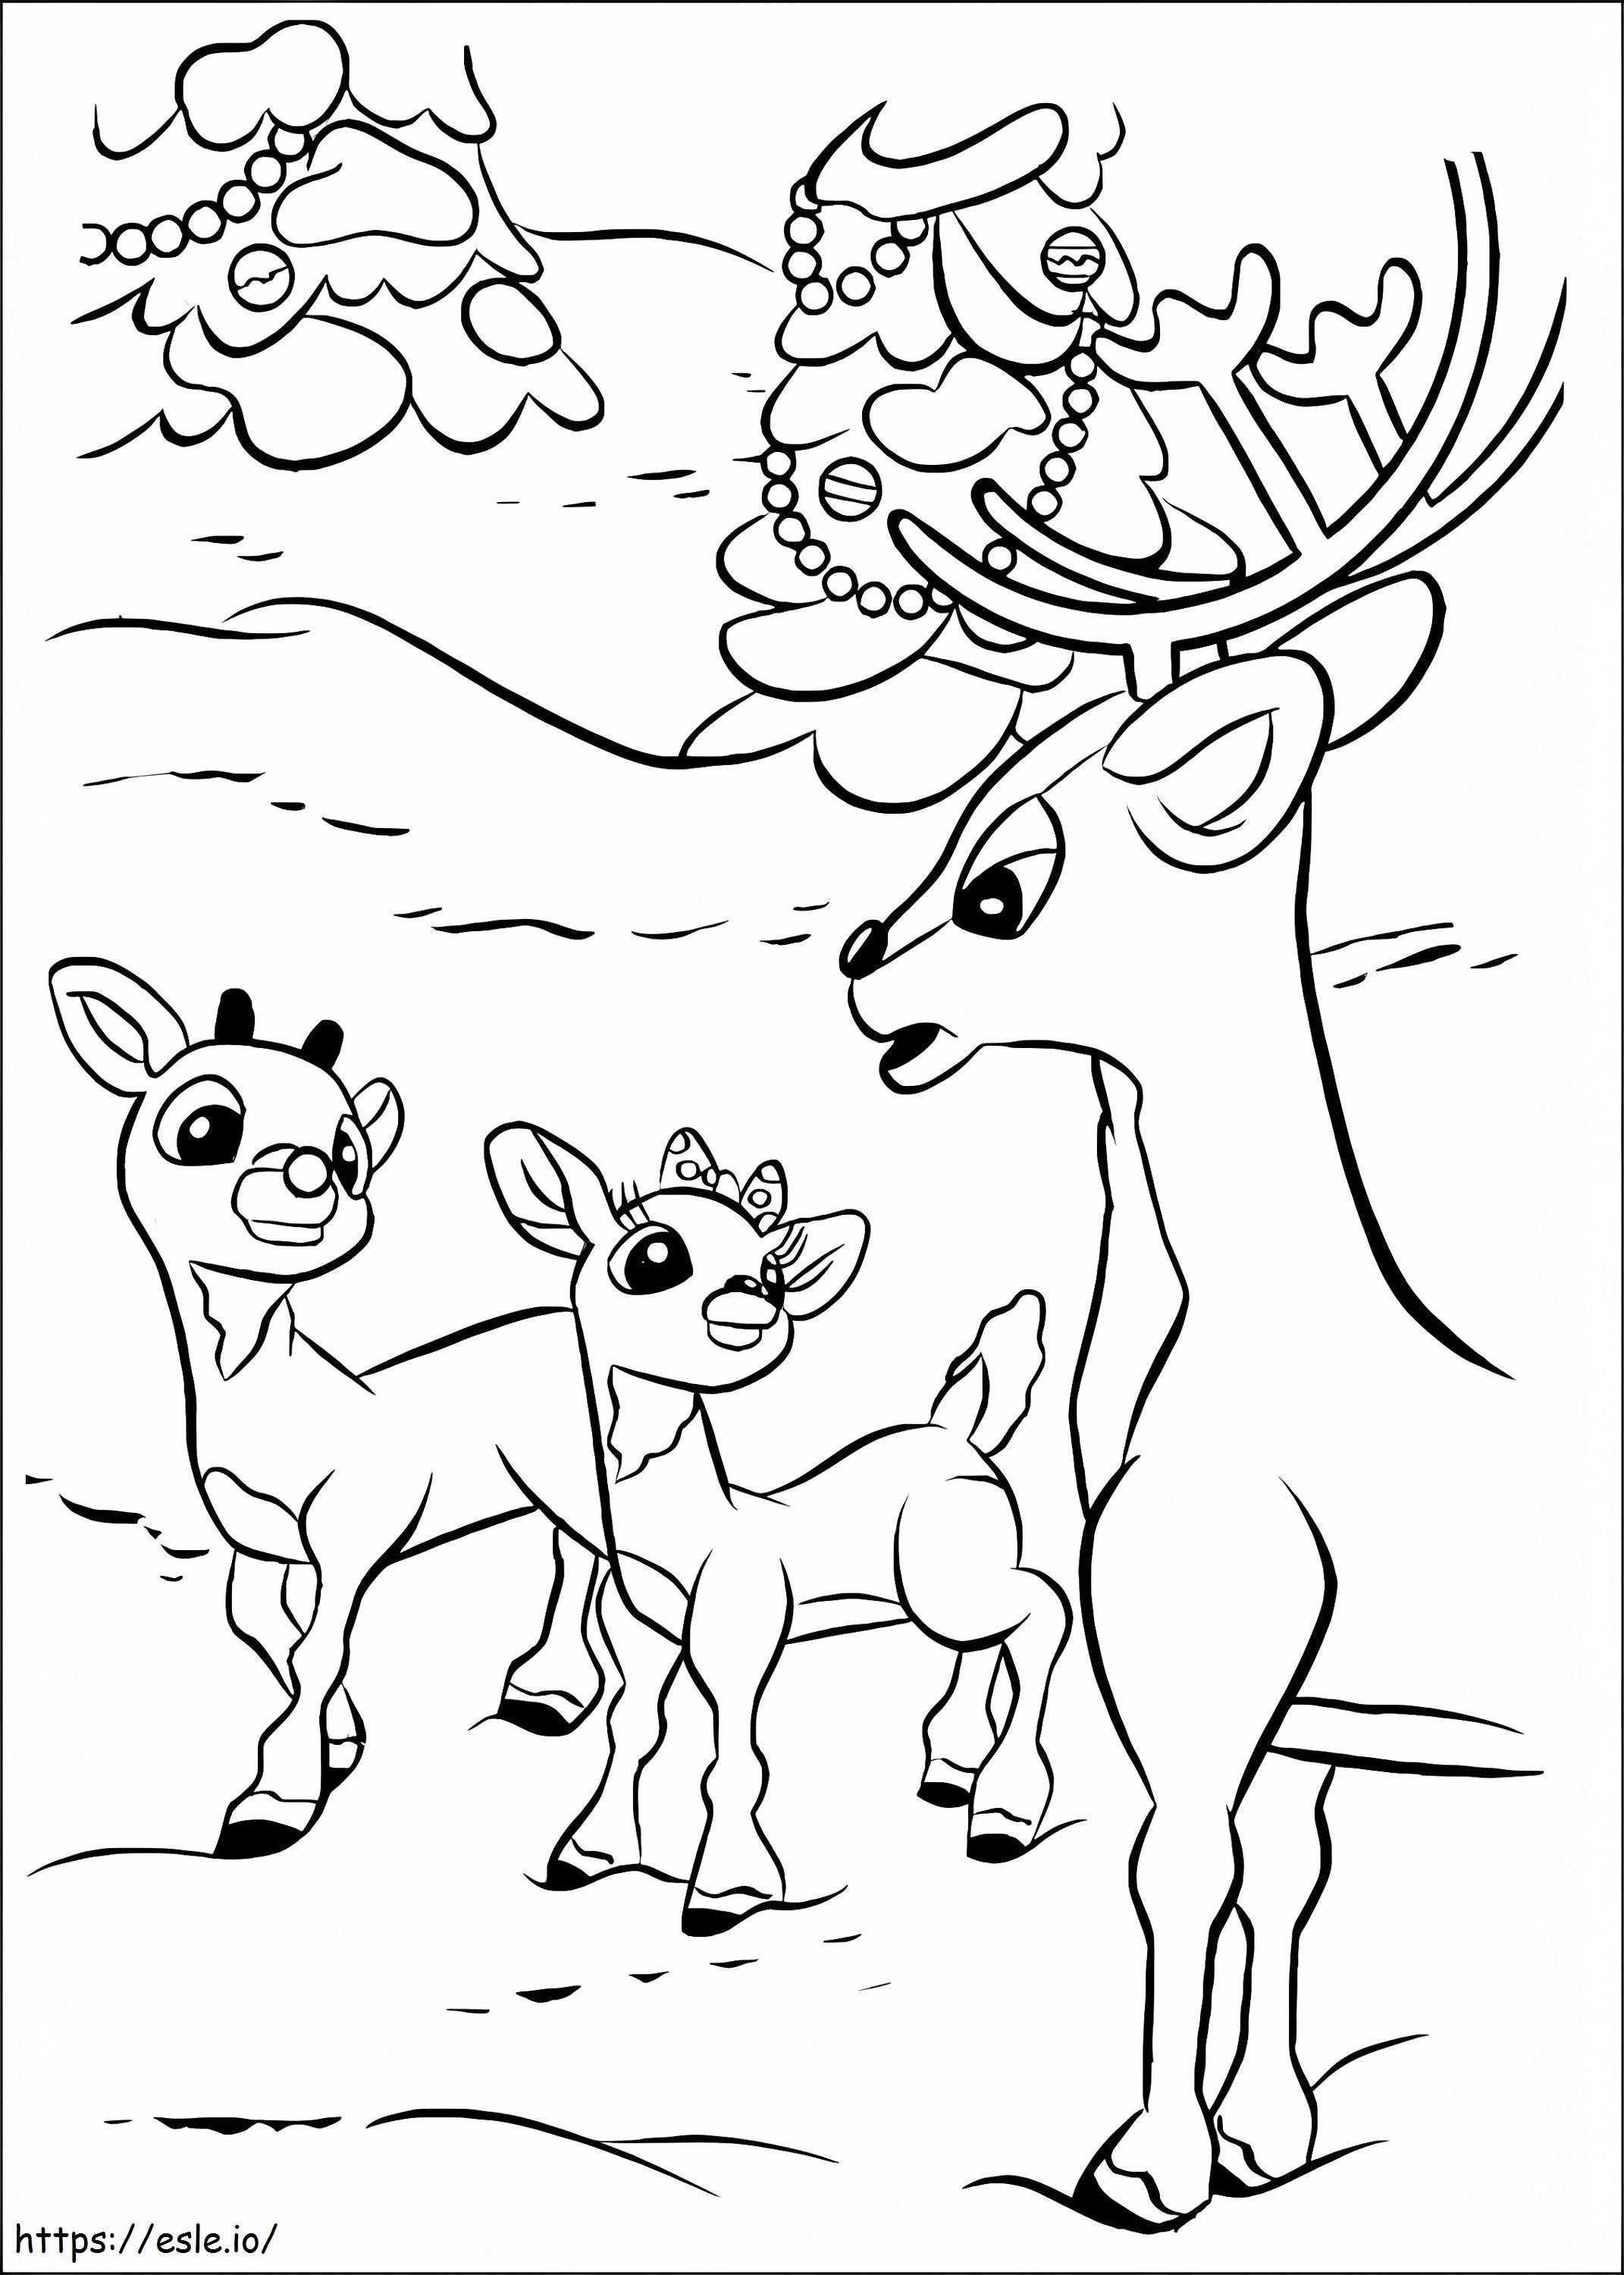 Rudolph 9 coloring page